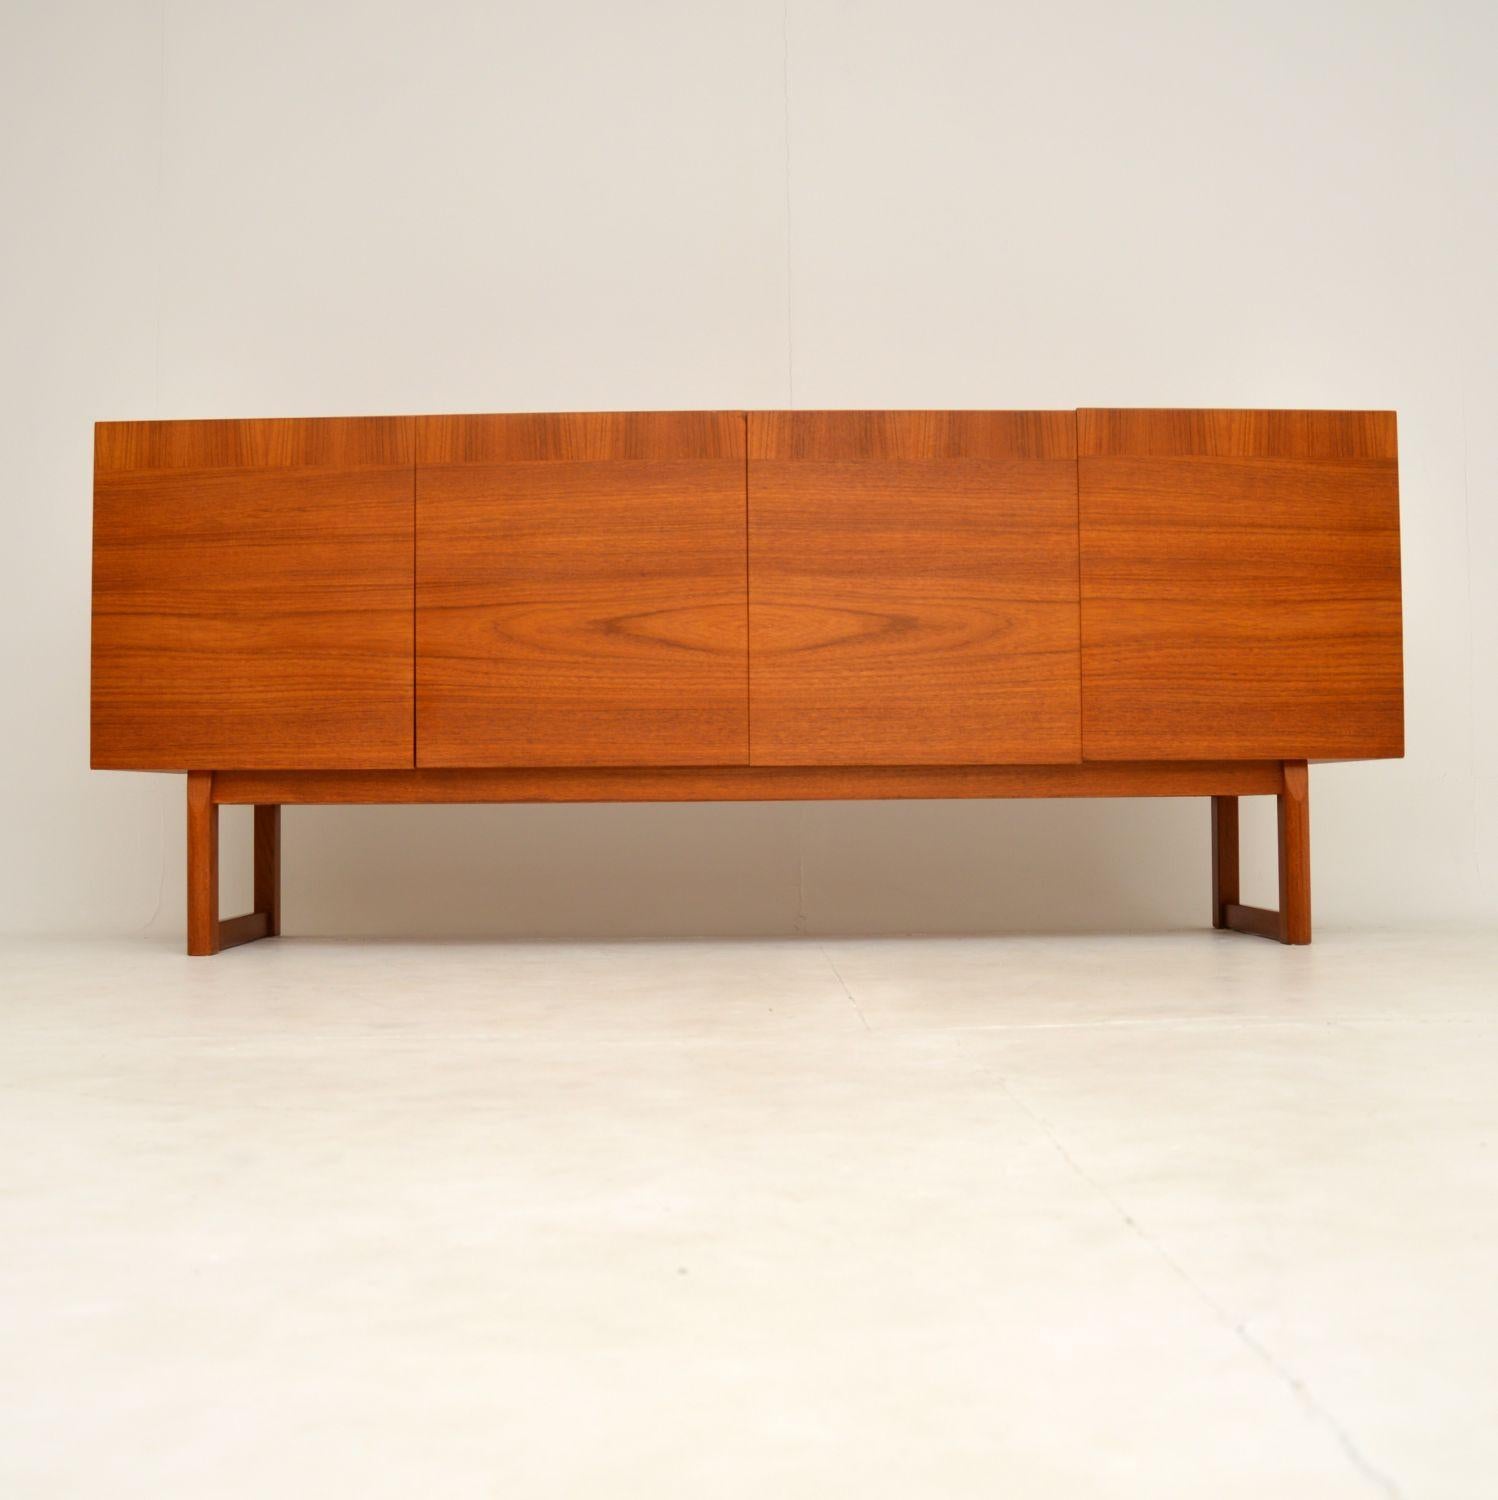 A stunning vintage teak sideboard designed by the famous Danish designer IB Kofod-Larsen. It was made in Sweden by Seffle, and dates from the 1960’s.

This has a wonderful sleek and minimal design, with four doors and two cabinets. The cabinets